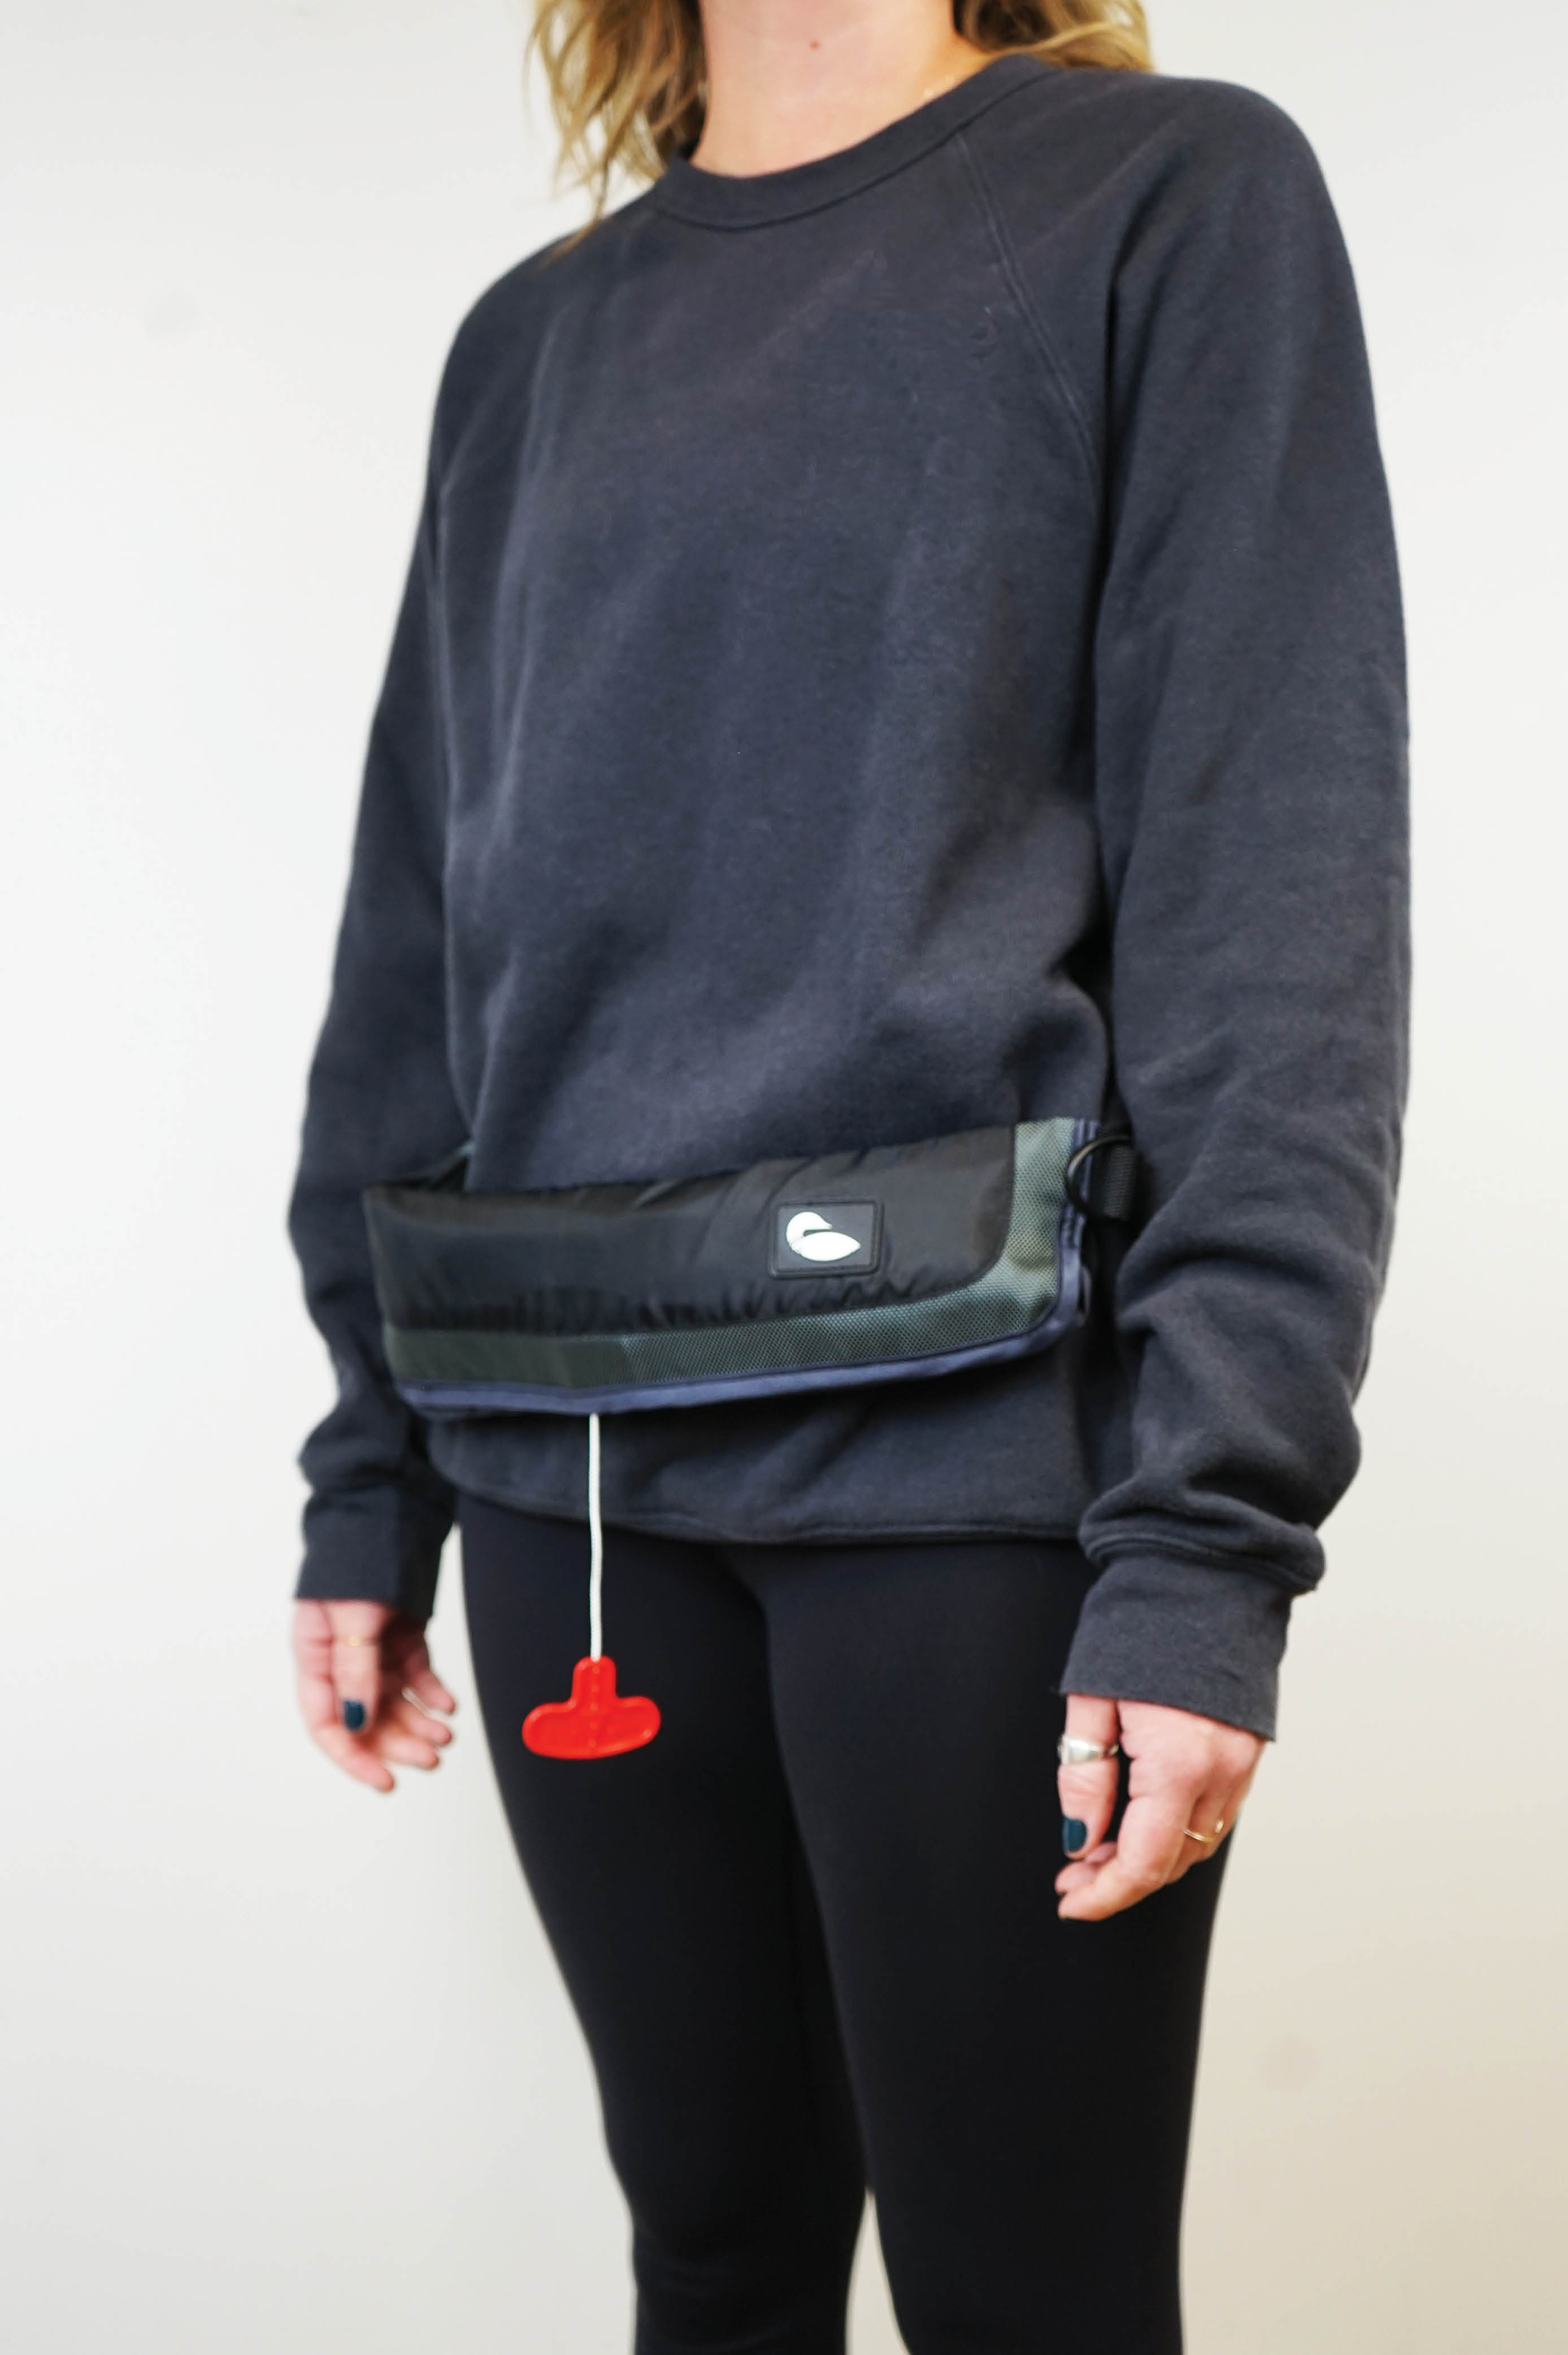 Inflatable Belt Pack (PFD)